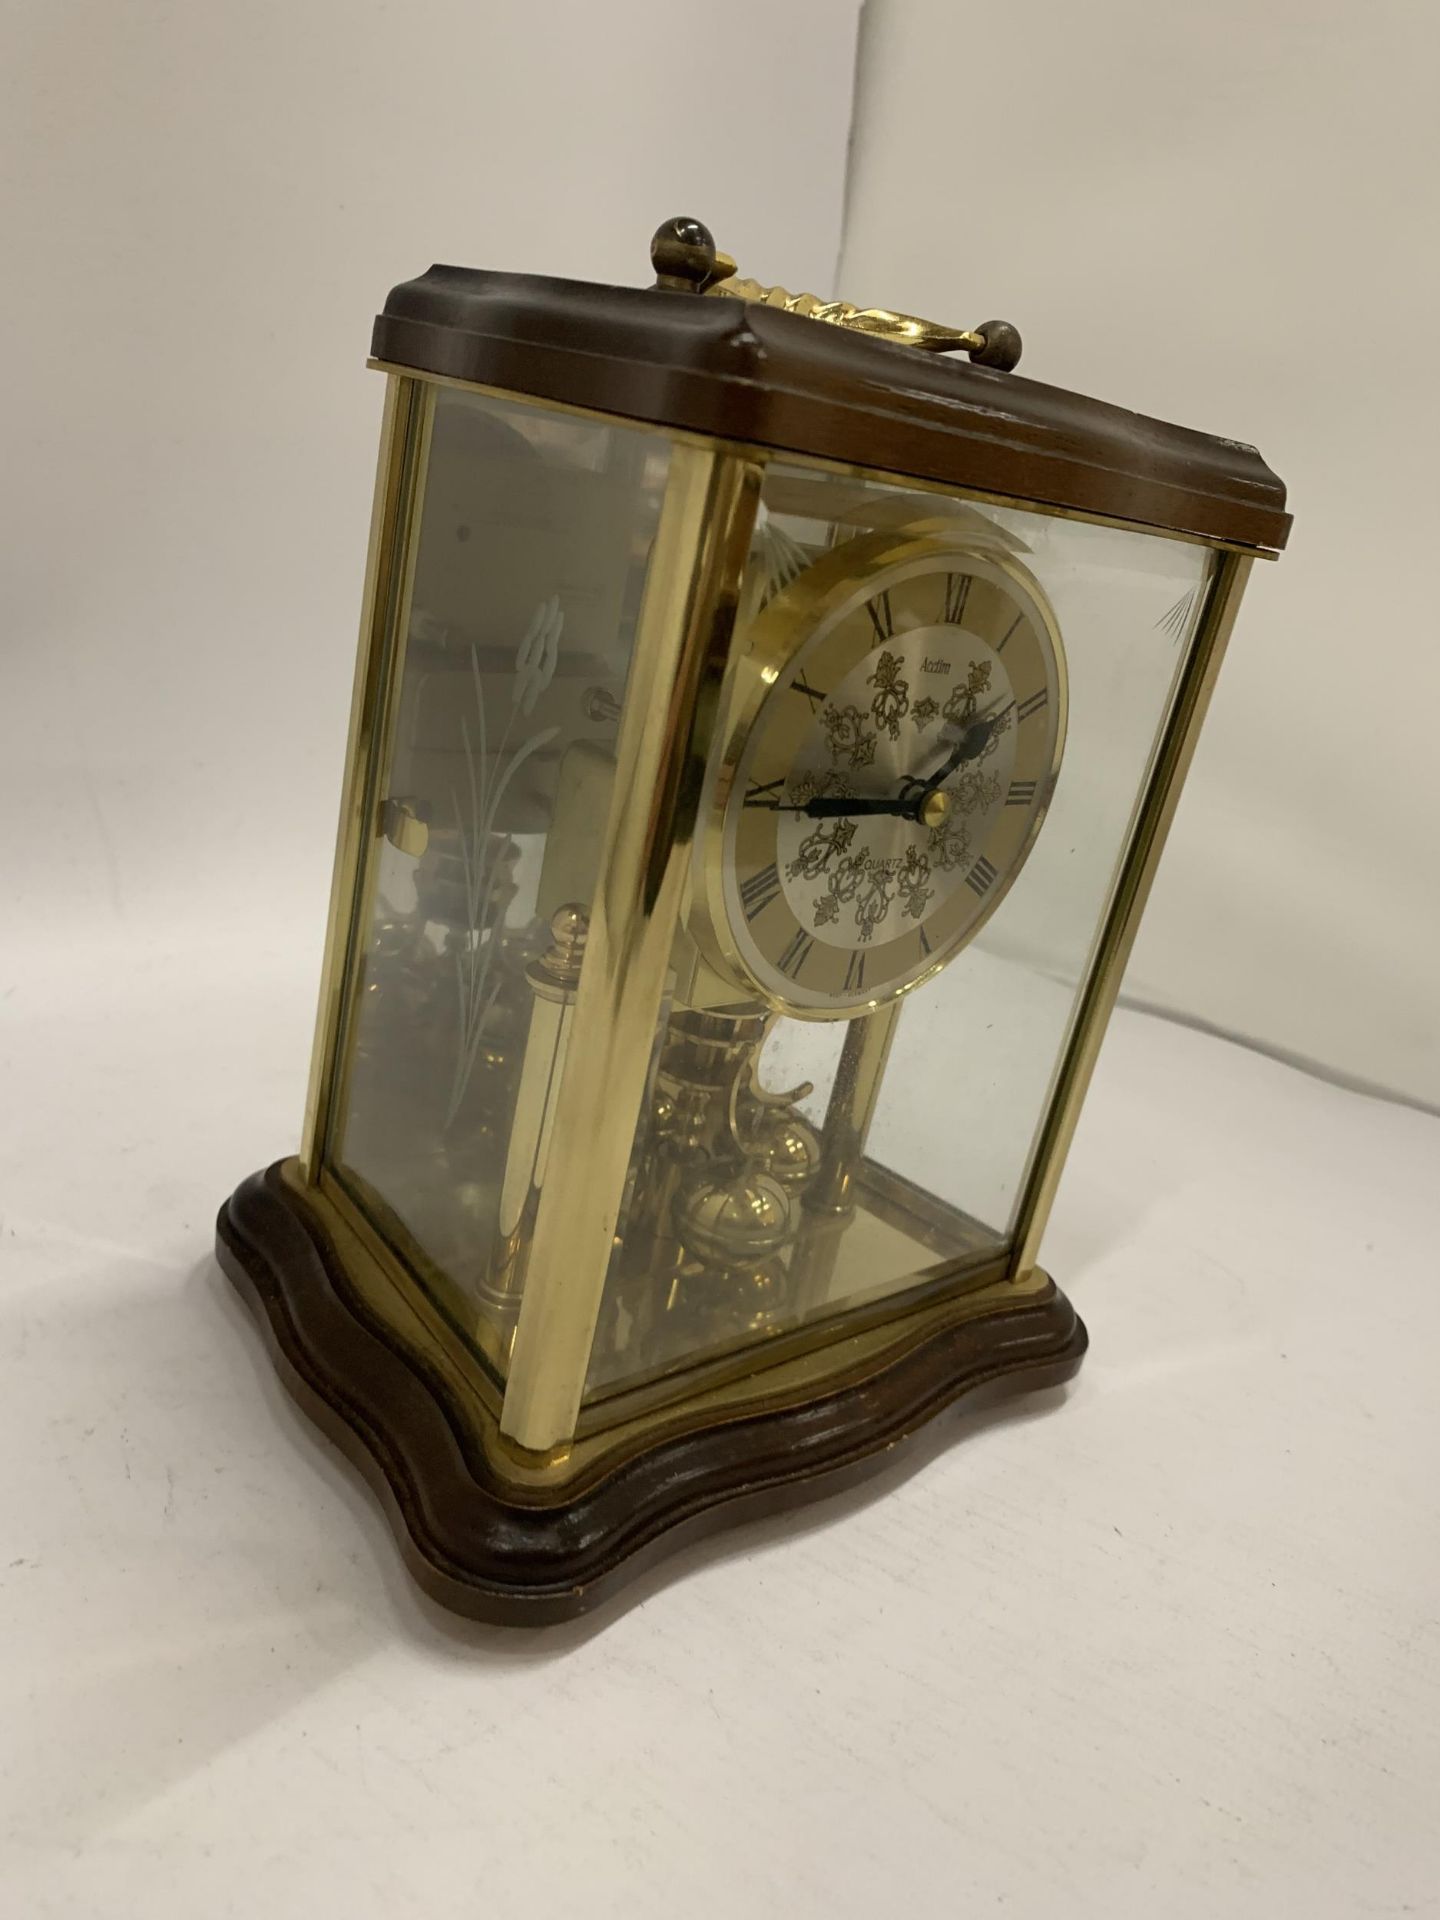 A WOOD AND GLASS CASED ANNIVERSARY CLOCK MADE BY ACCTIM - Image 3 of 8